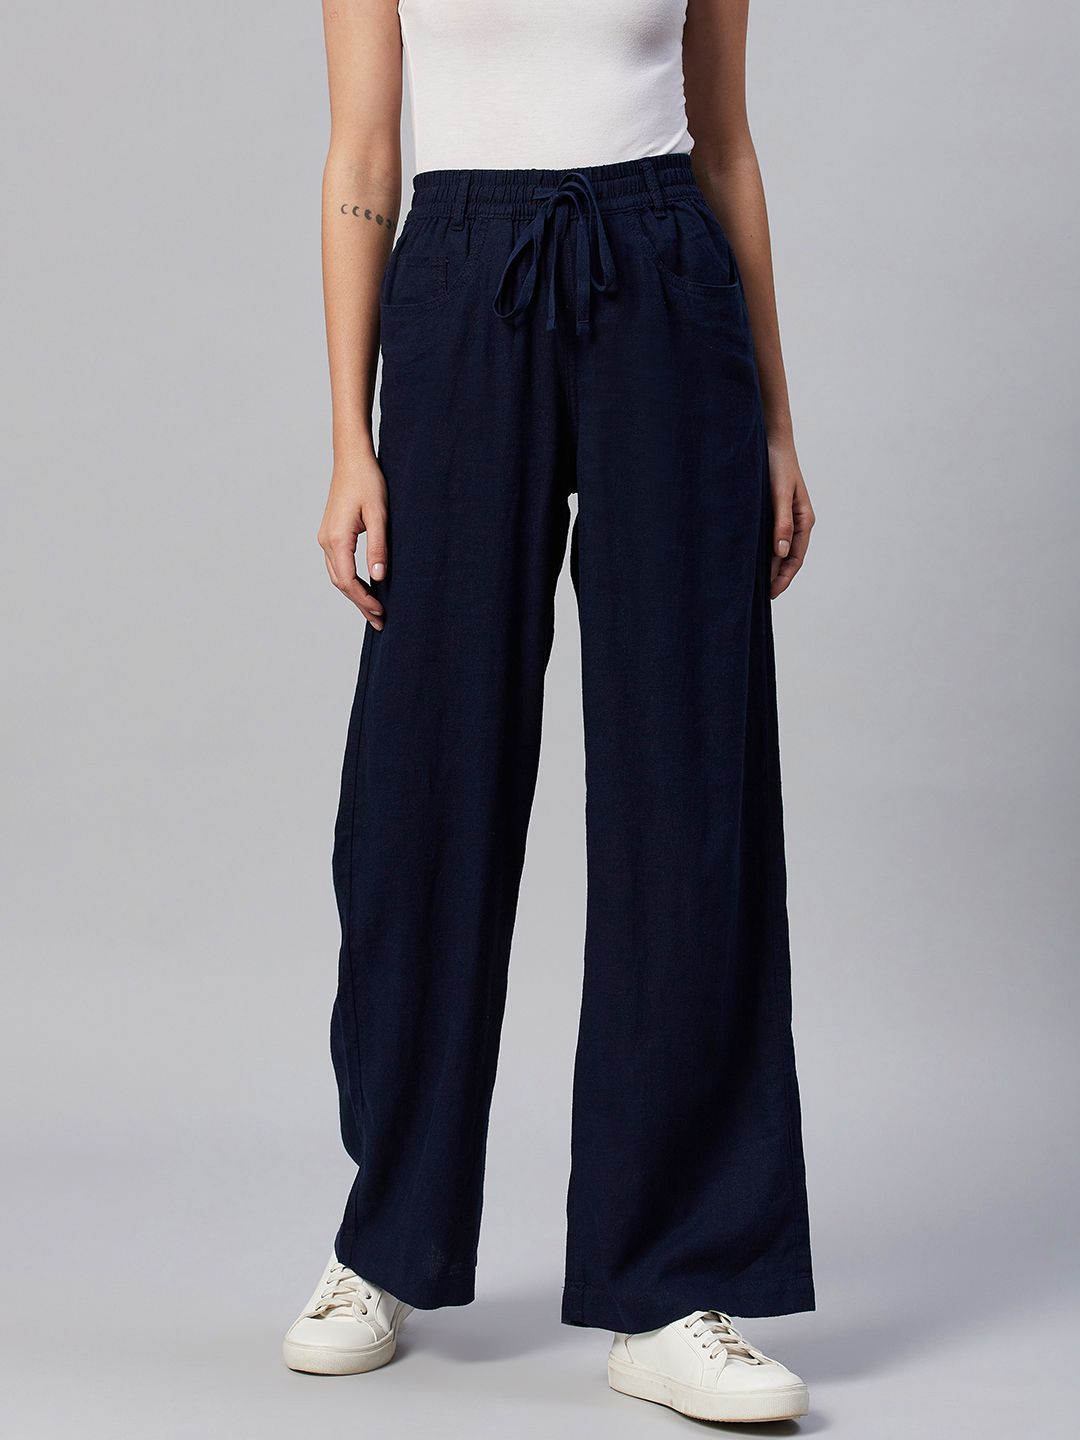 Marks & Spencer Women Navy Blue Trousers Price in India